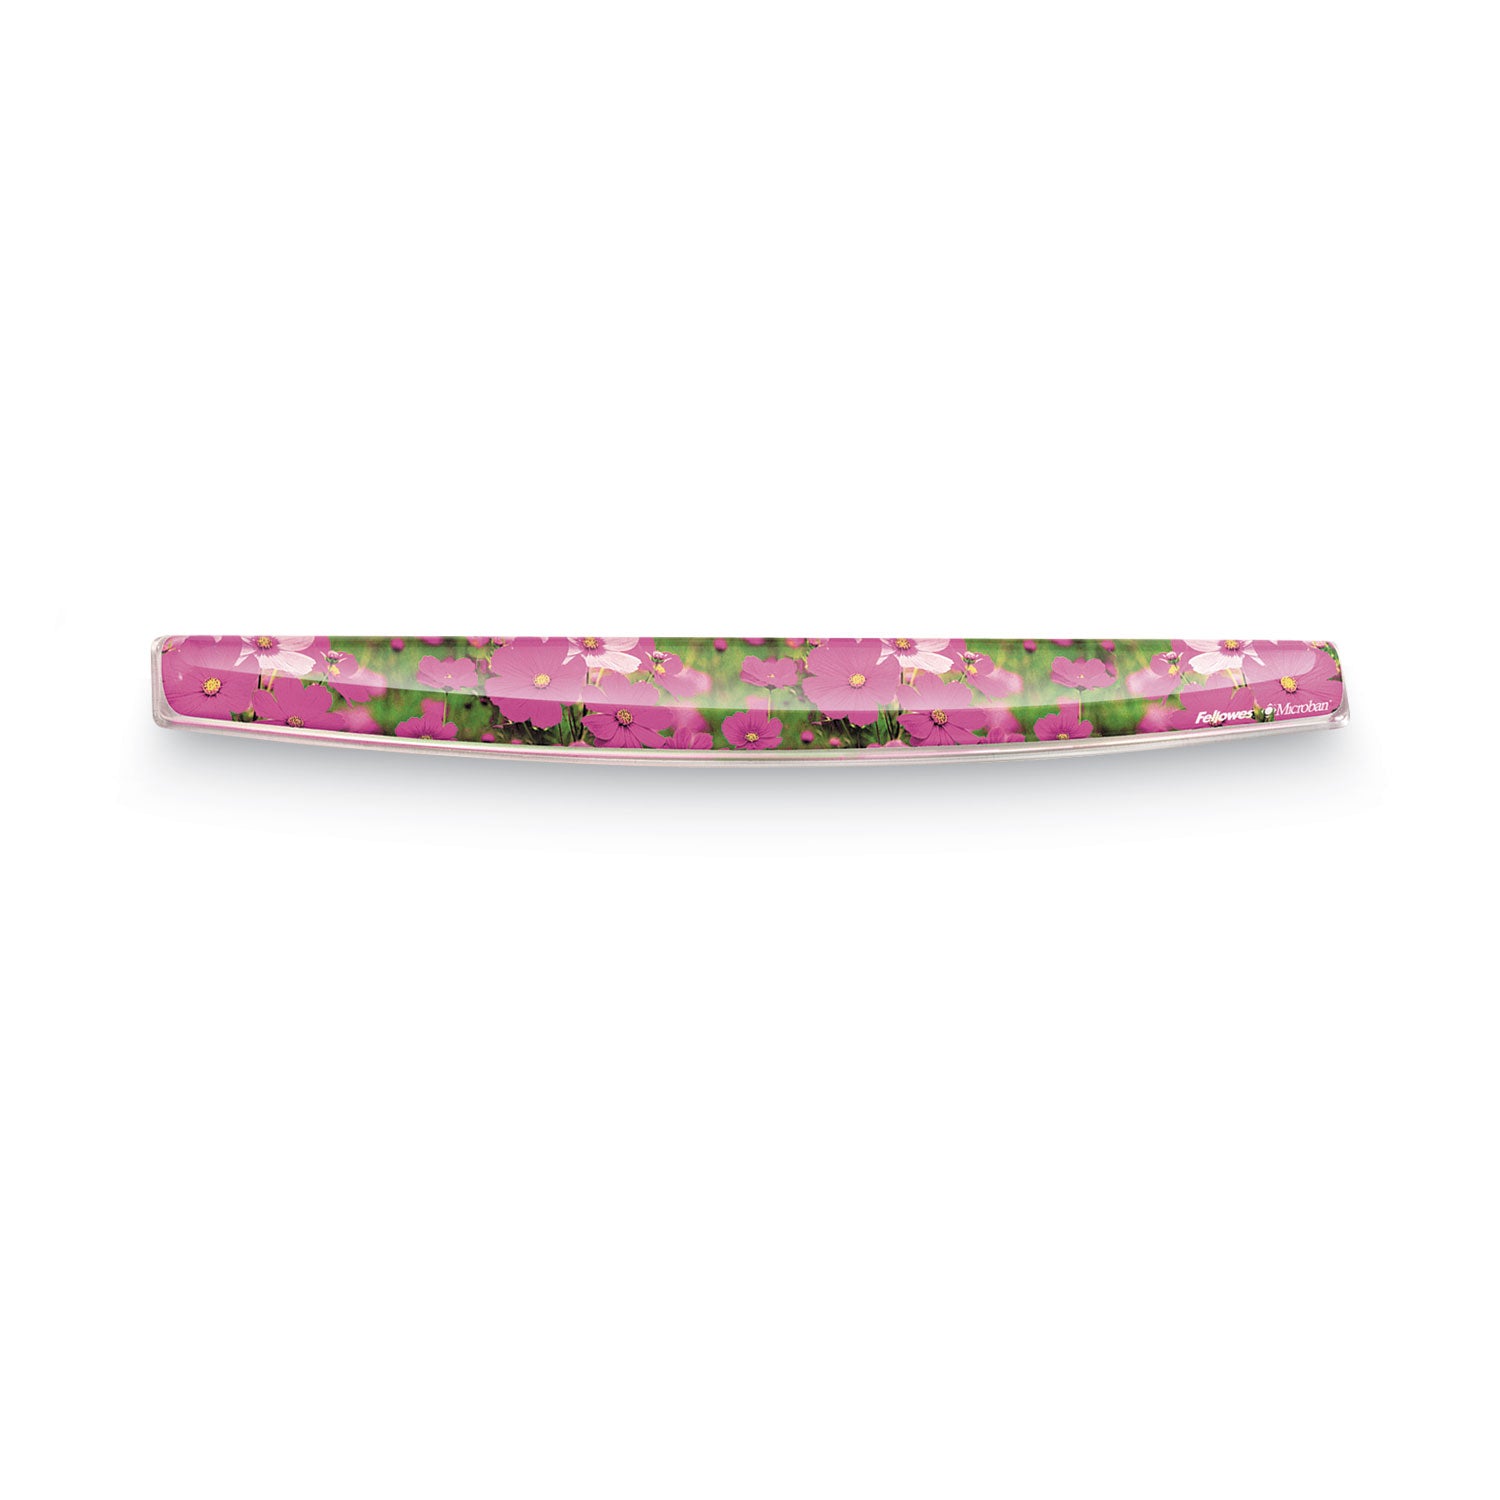 Photo Gel Keyboard Wrist Rest with Microban Protection, 18.56 x 2.31, Pink Flowers Design - 